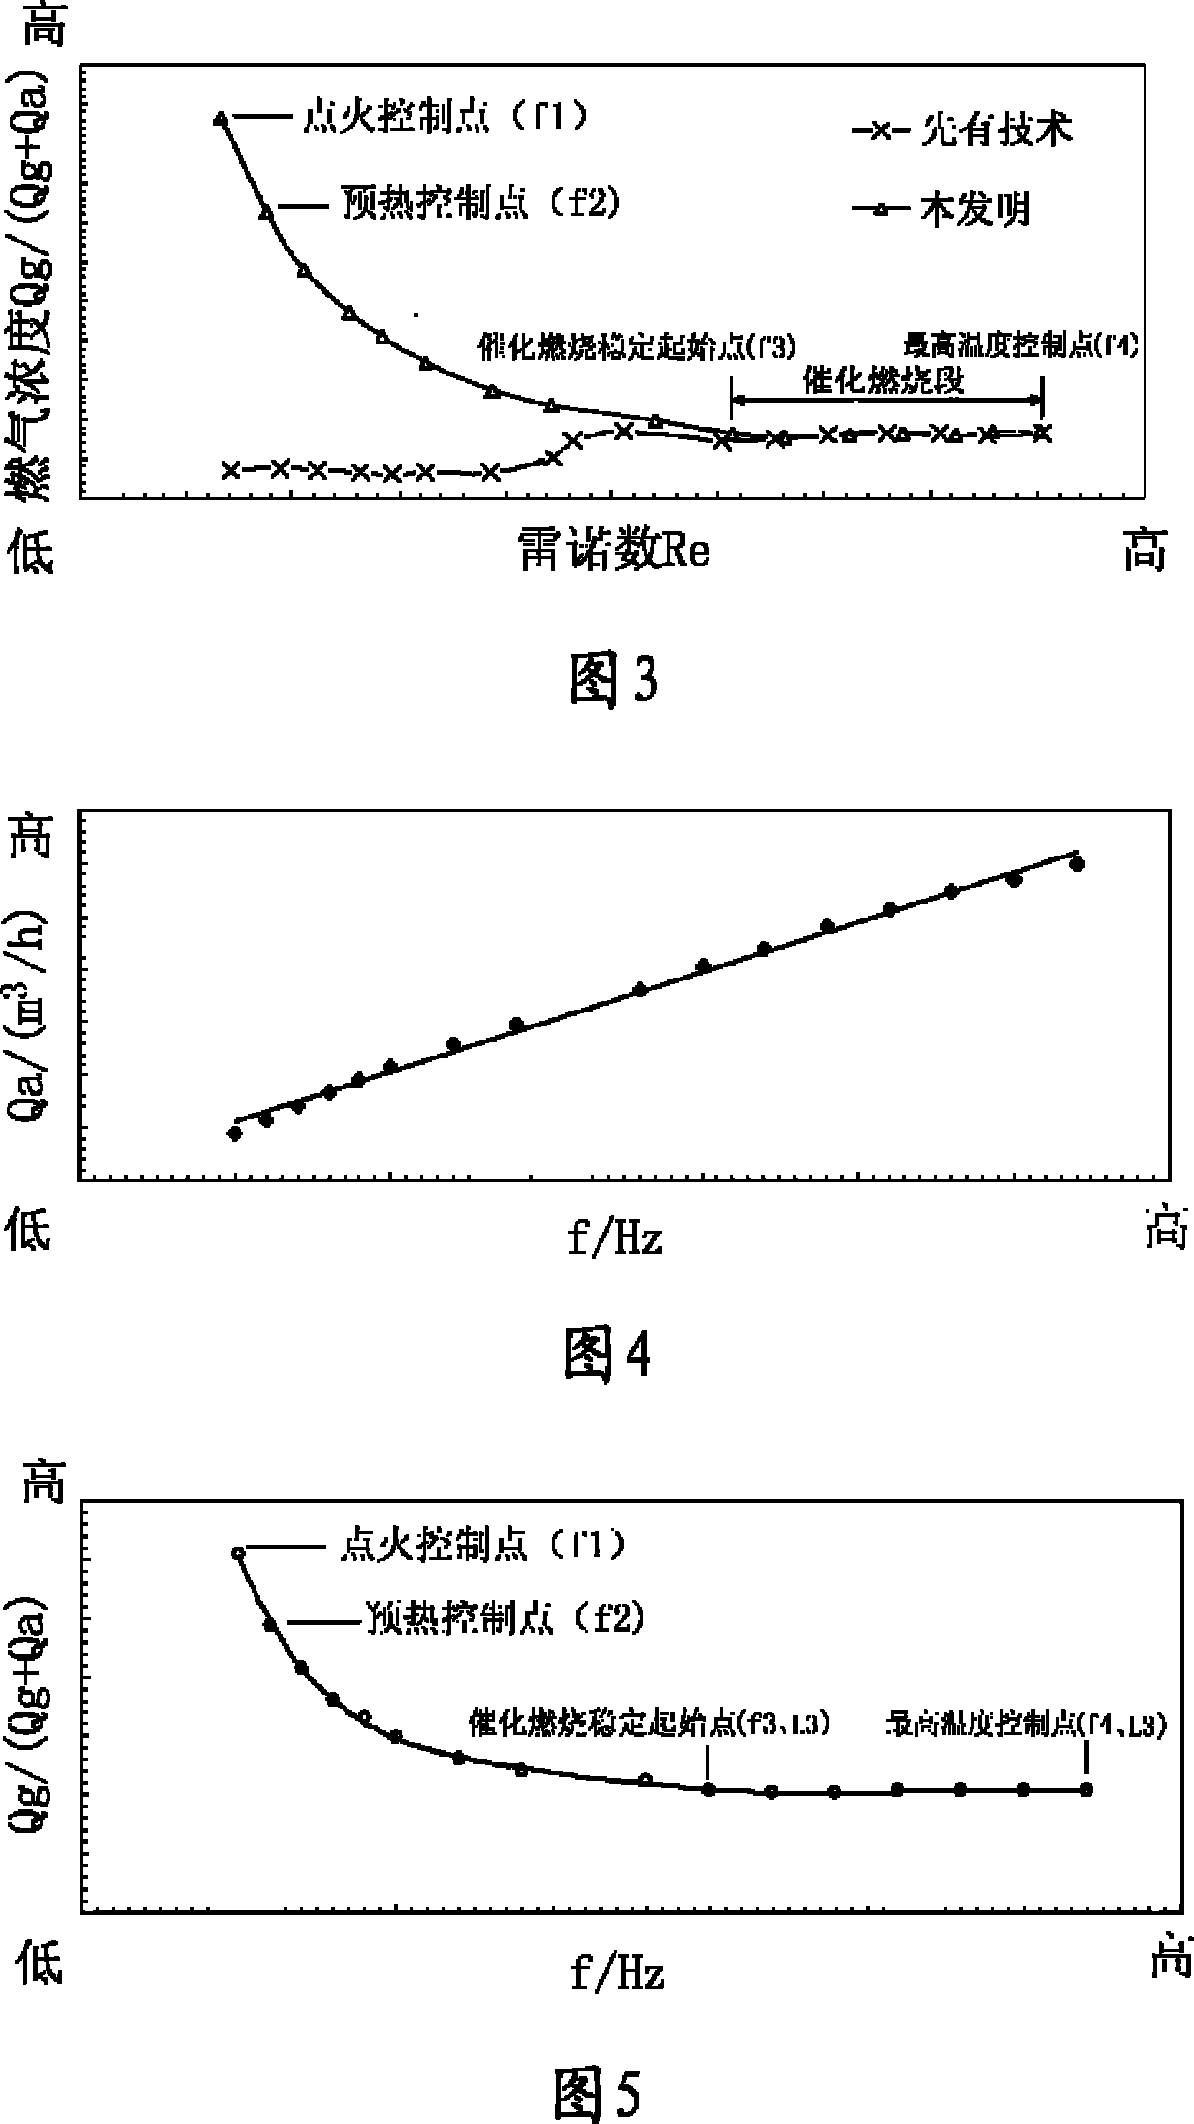 Control system for catalytic combustion